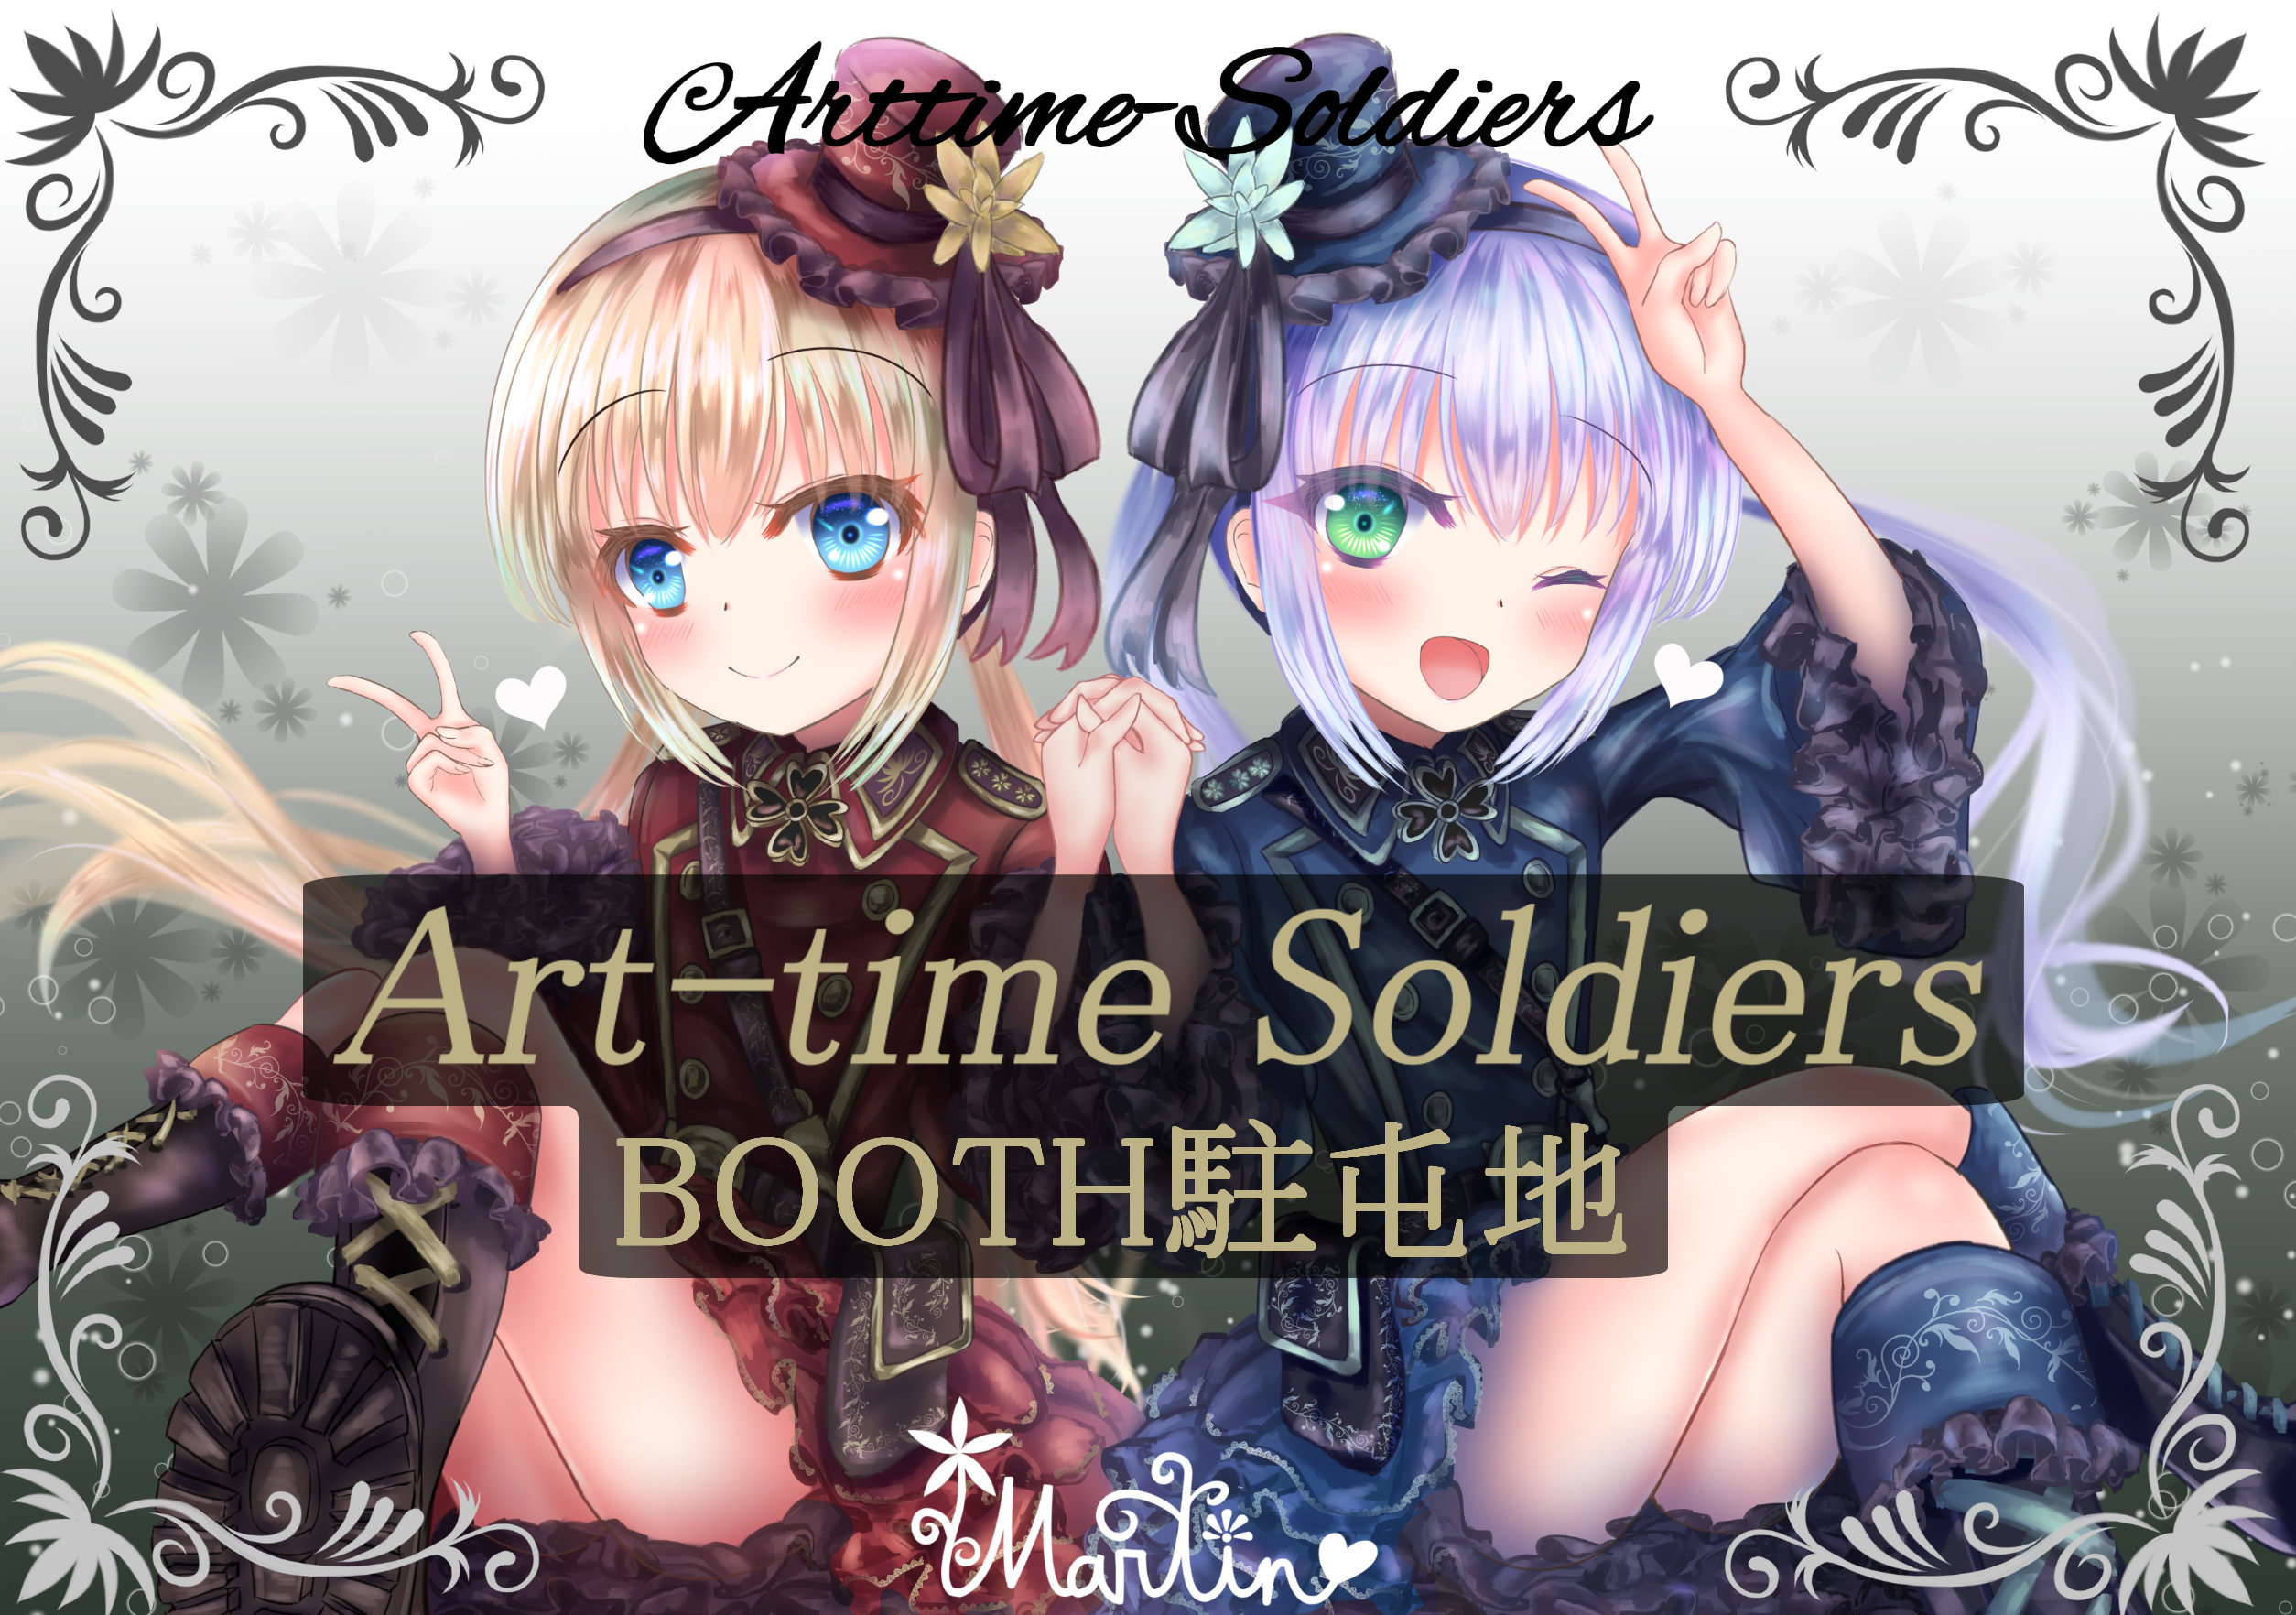 Art-time Soldiers BOOTH駐屯地